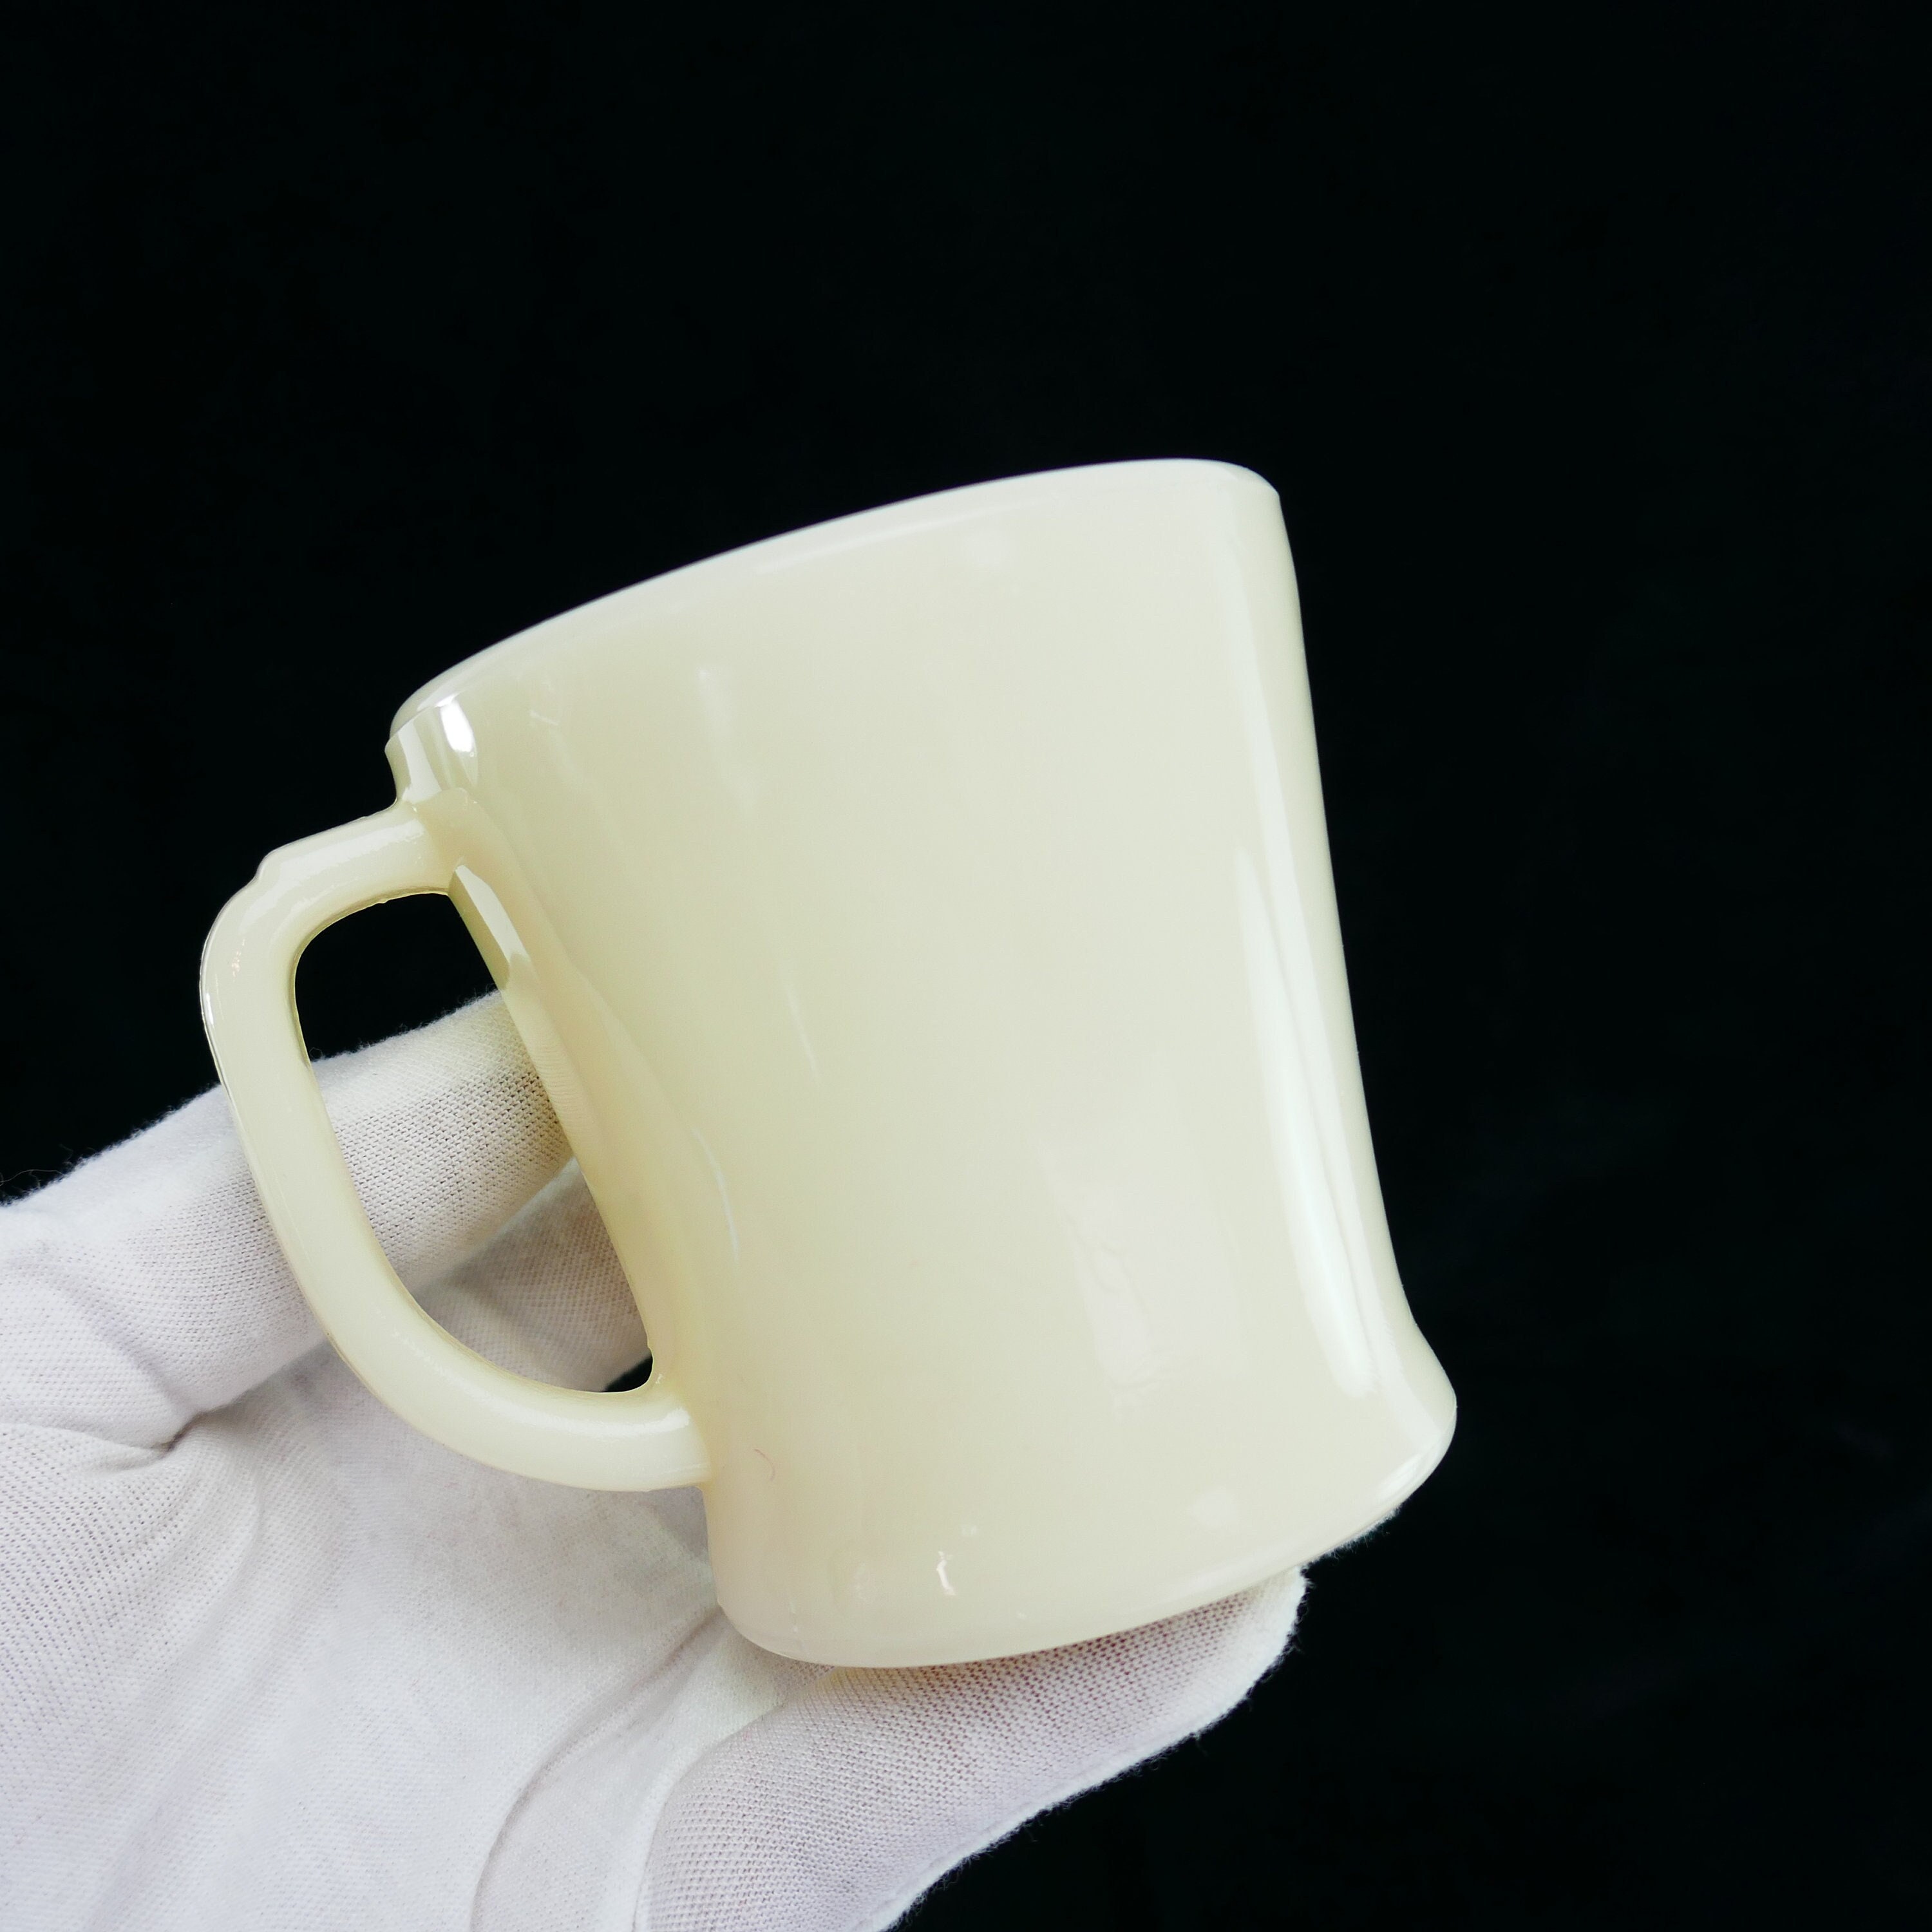 Vintage Fire-king Mug Flat Bottom Ivory Glass Coffee Cup Step D Handle Oven  Ware 1940s Retro Kitchen Collectible Kitchenware 